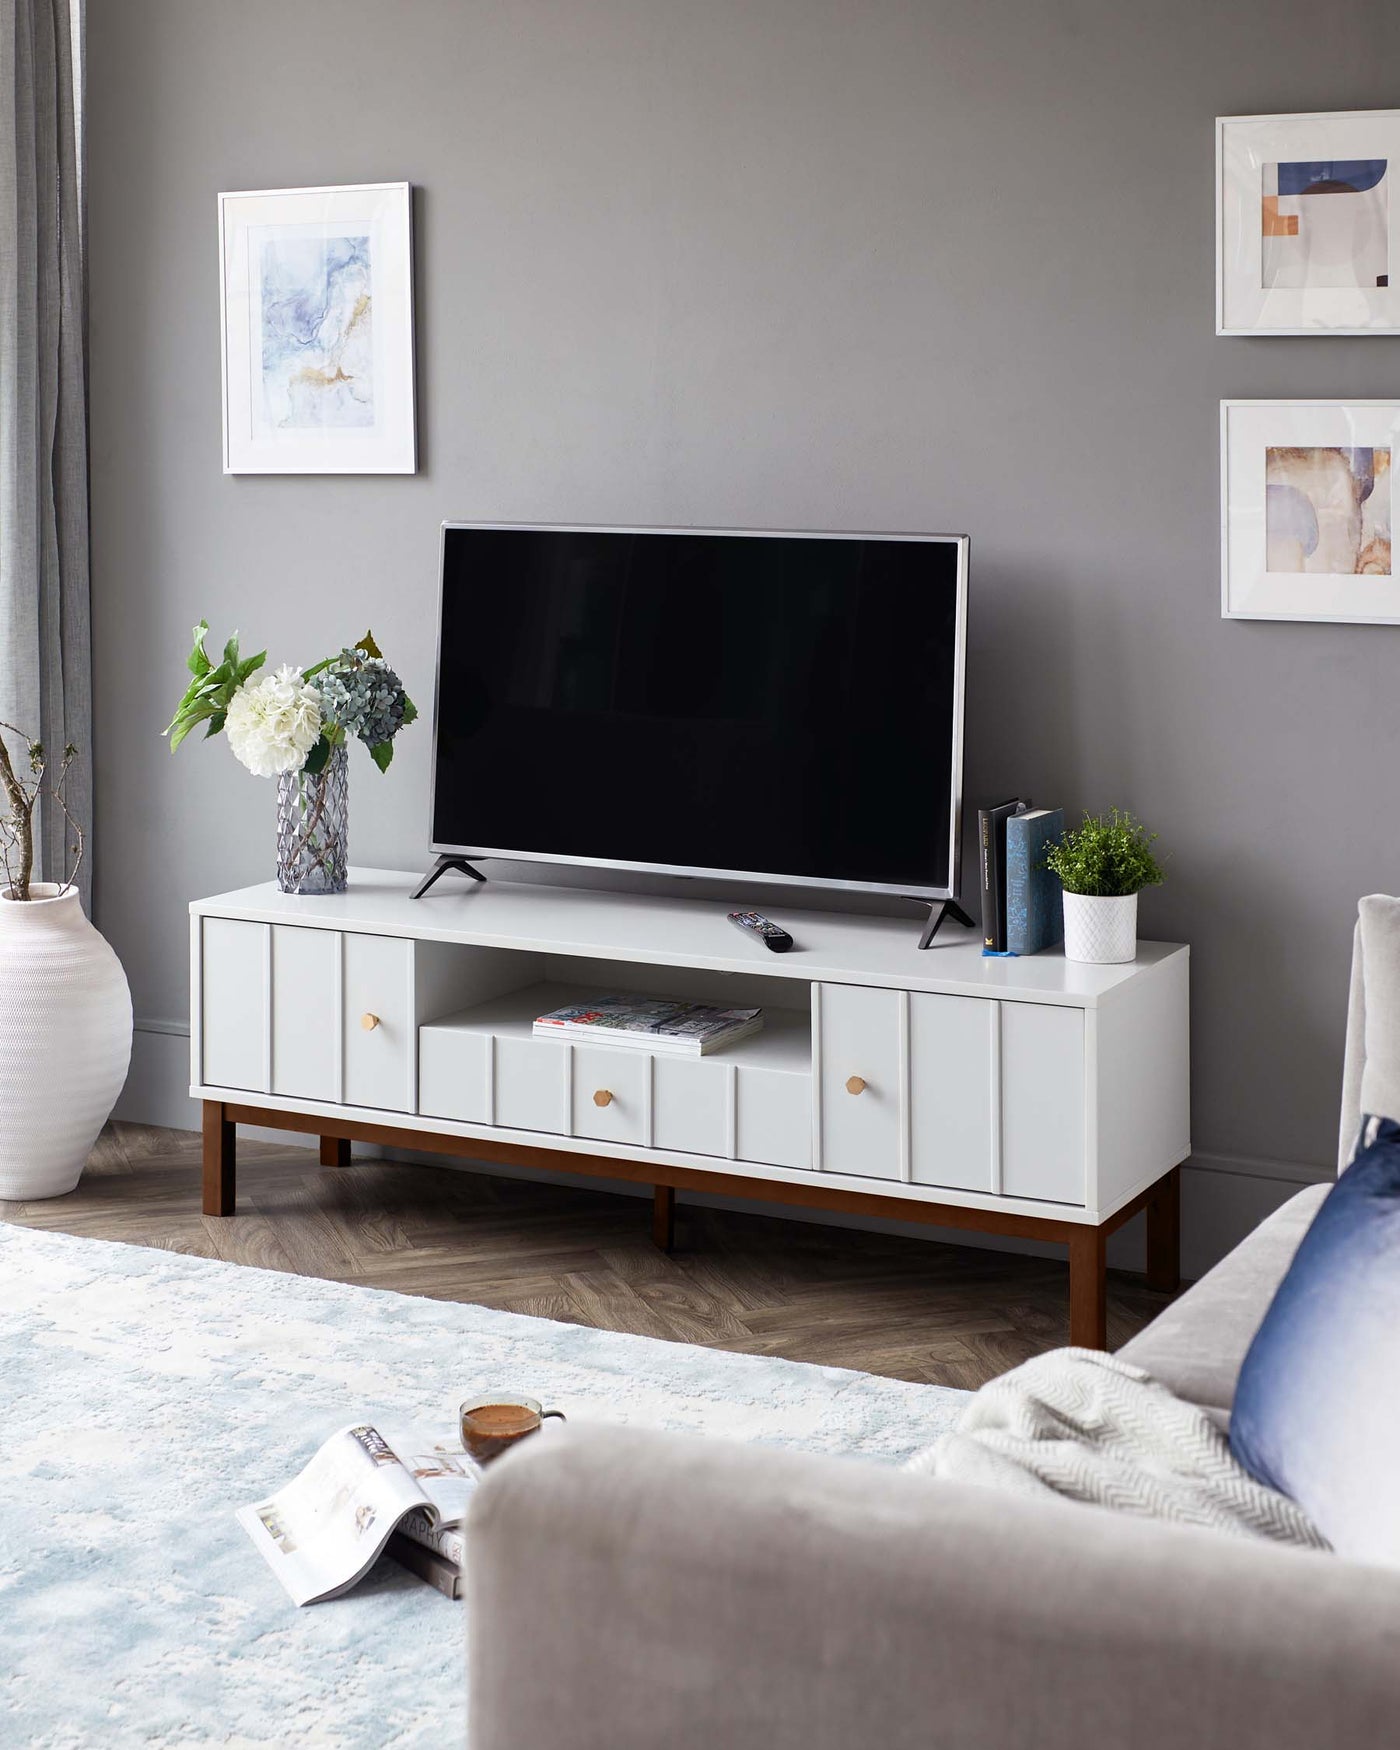 A modern white television stand with a rectangular shape and clean lines, featuring a series of drawers and open shelves. The stand has a contrasting dark wood base with tapered legs, complementing the minimalist design. A flat-screen TV is centred on top, with decorative items such as books and plants placed around it to create a homey atmosphere.